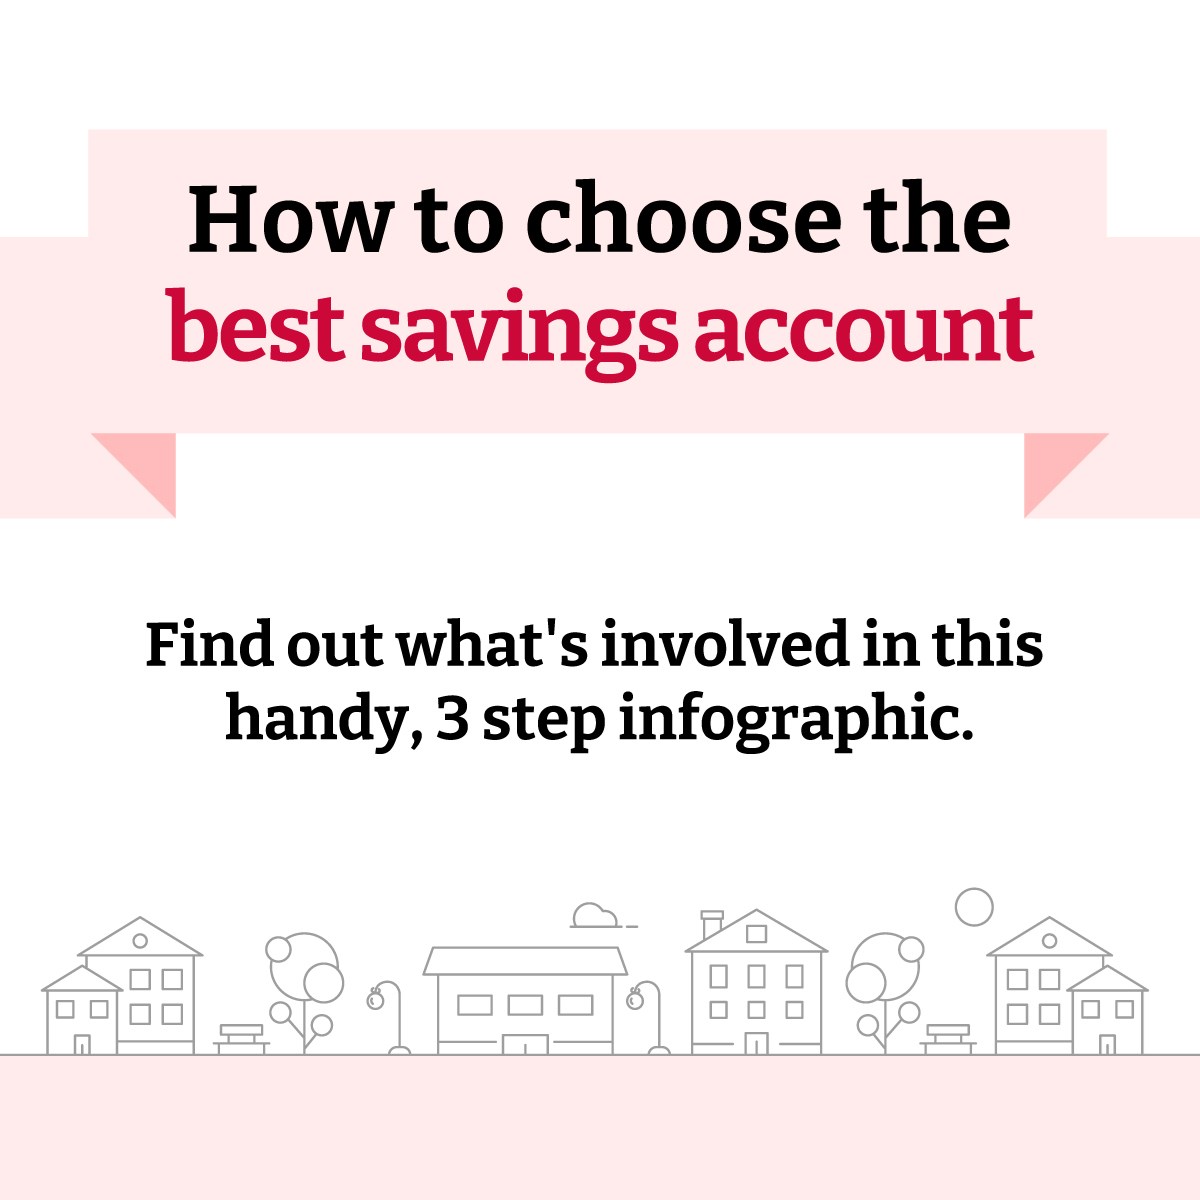 https://www.heritage.com.au/-/media/m/tools/infographics/thumbnails/how-to-choose-the-best-saving-account.jpg?rev=a4a74cc6ea6e4c9fb9d9c80d84b7d6fa&sc_lang=en&cx=0.5&cy=0.5&cw=1200&ch=1200&hash=F5FBD60FFC8DC892F6D5F2AC0E99641D